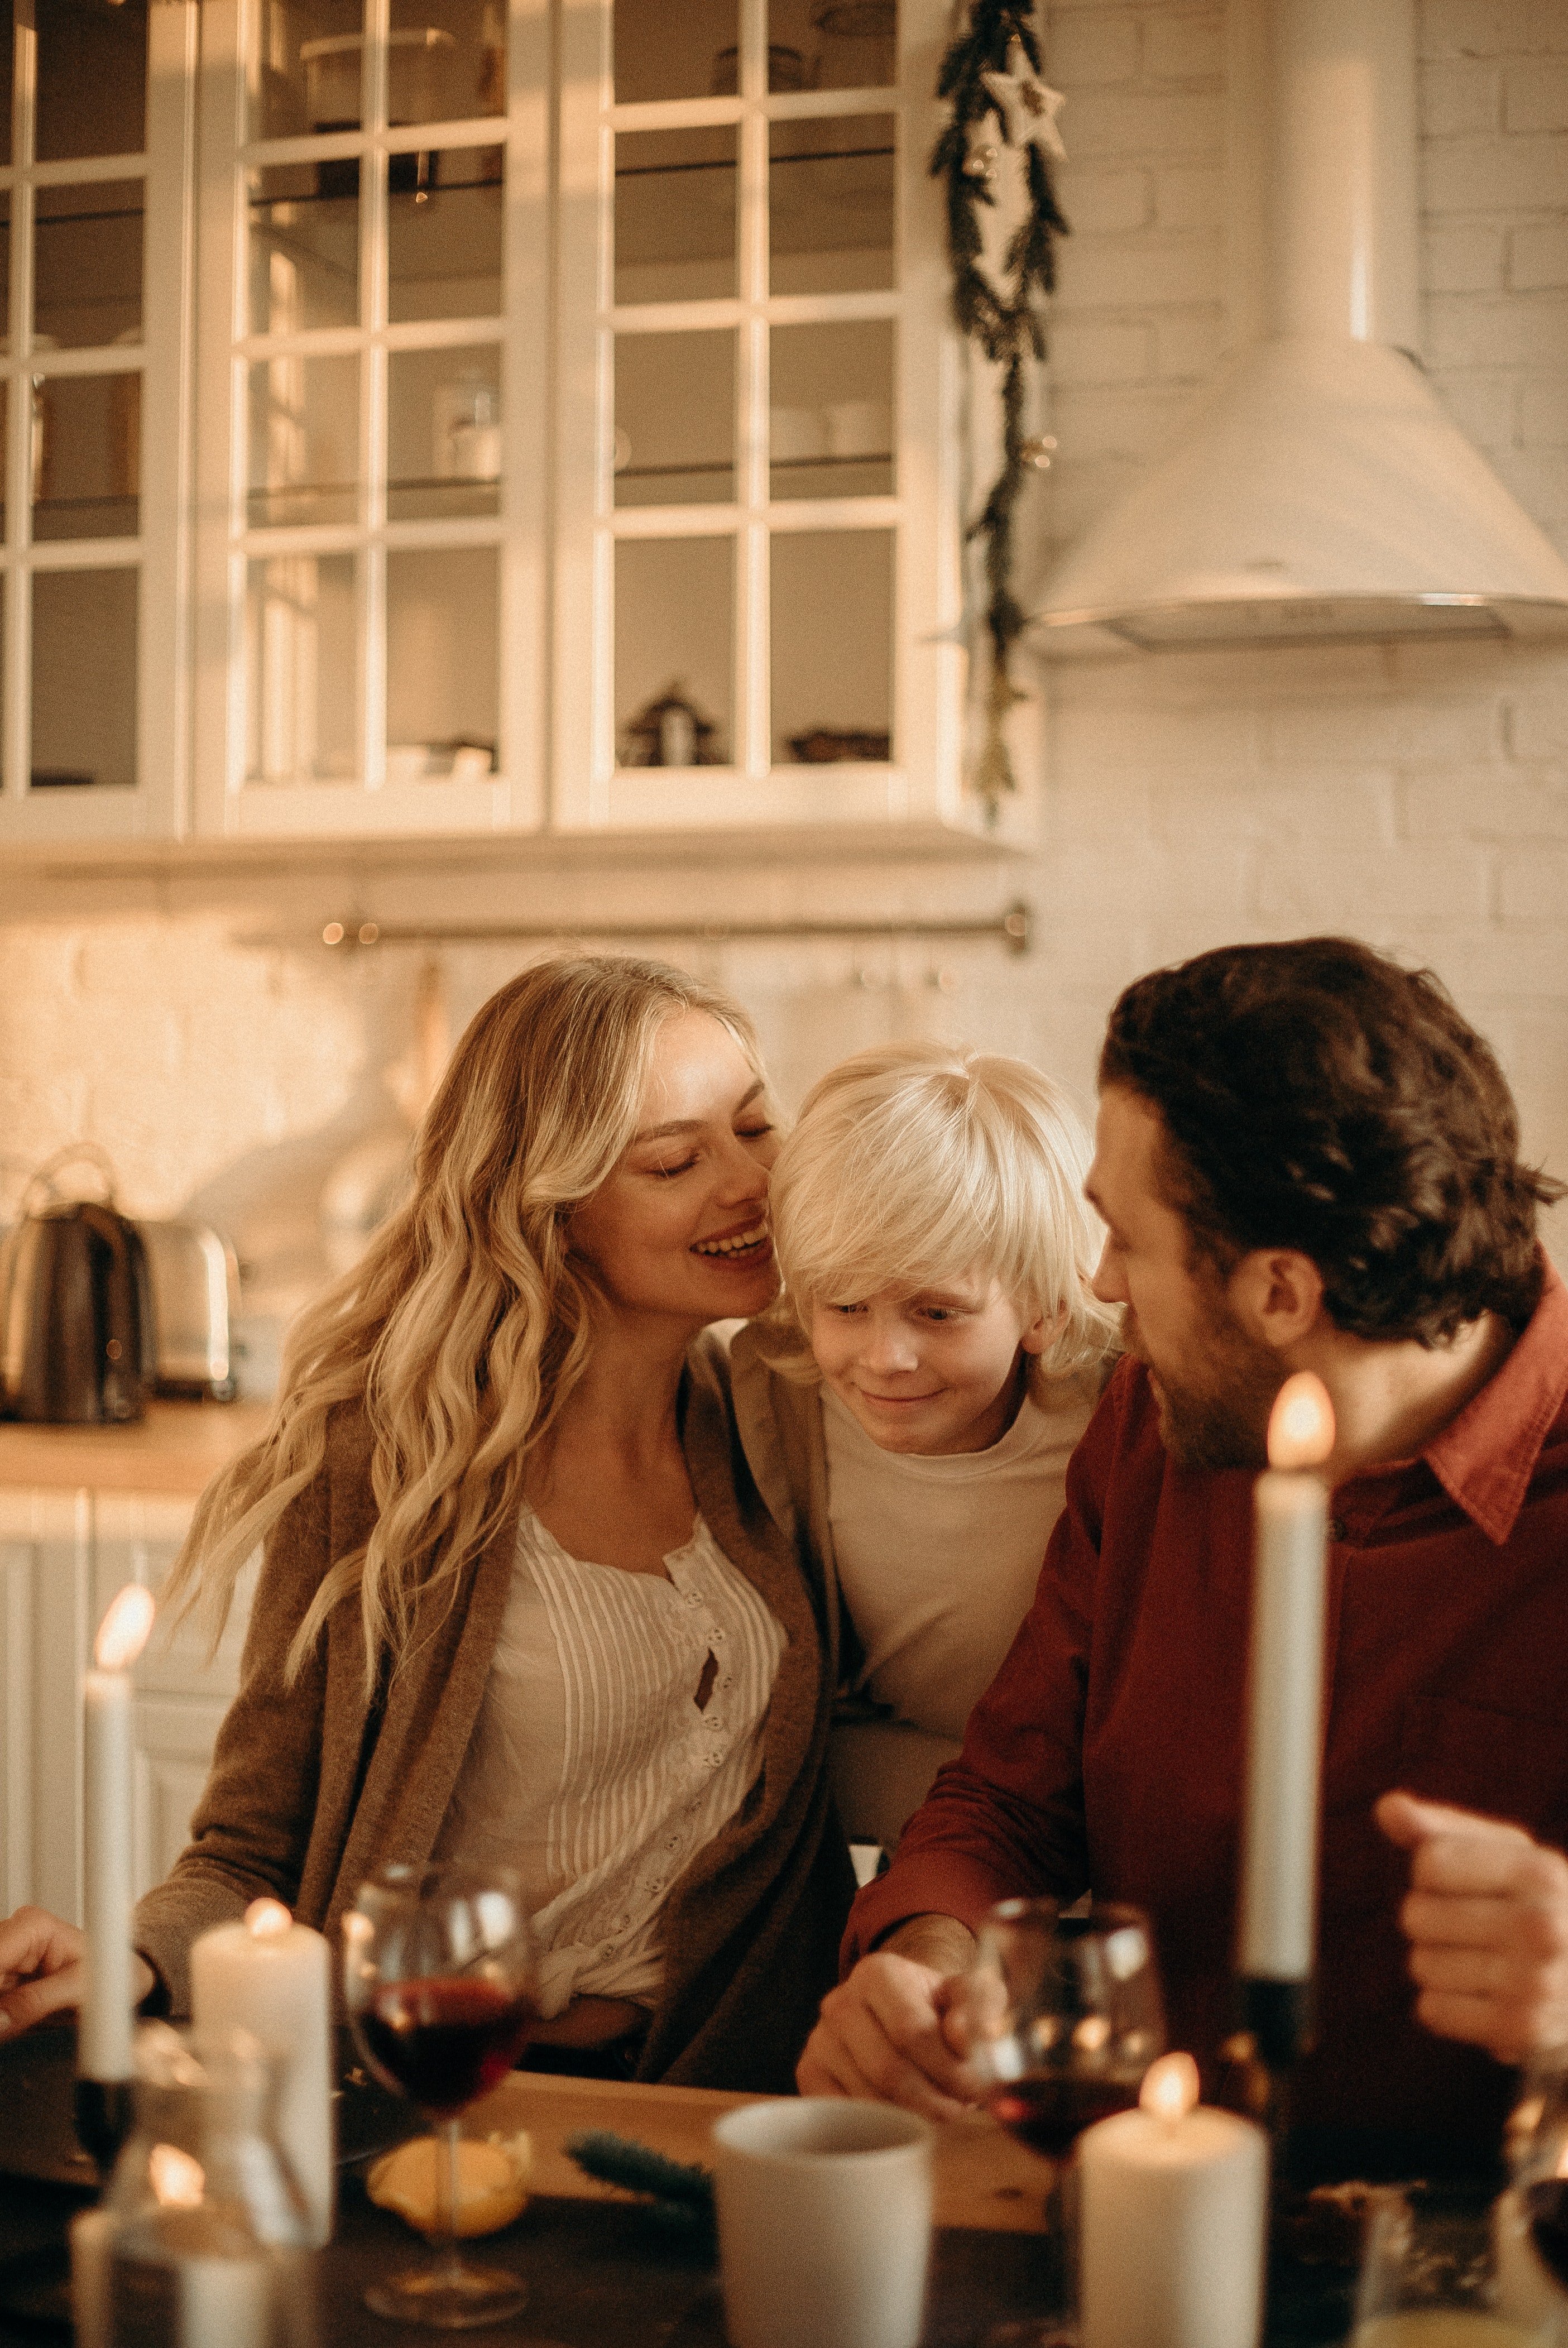 Peter got to know his parents after Adam's family hosted a meal for them. | Source: Pexels